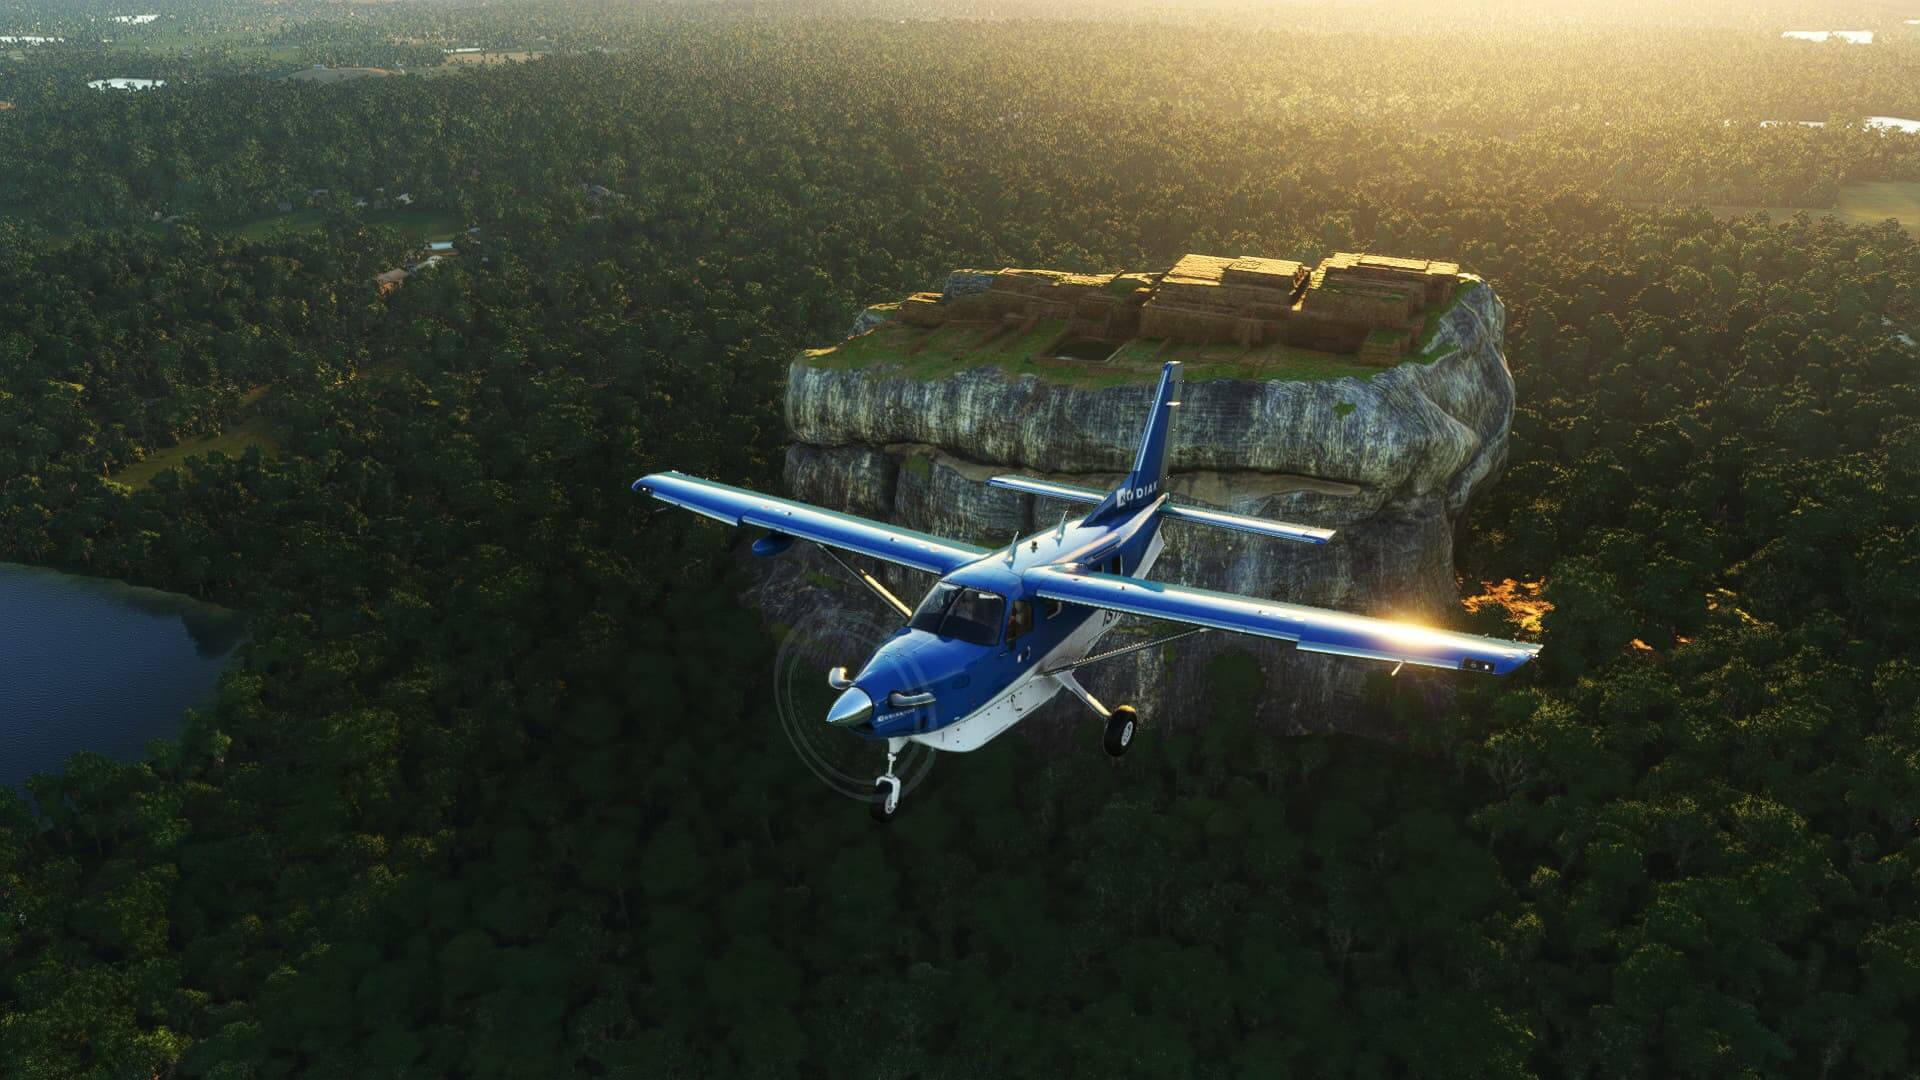 A high-wing propeller aircraft in blue and white paint over a monument located on a high rocky plateau, with dense forest trees below